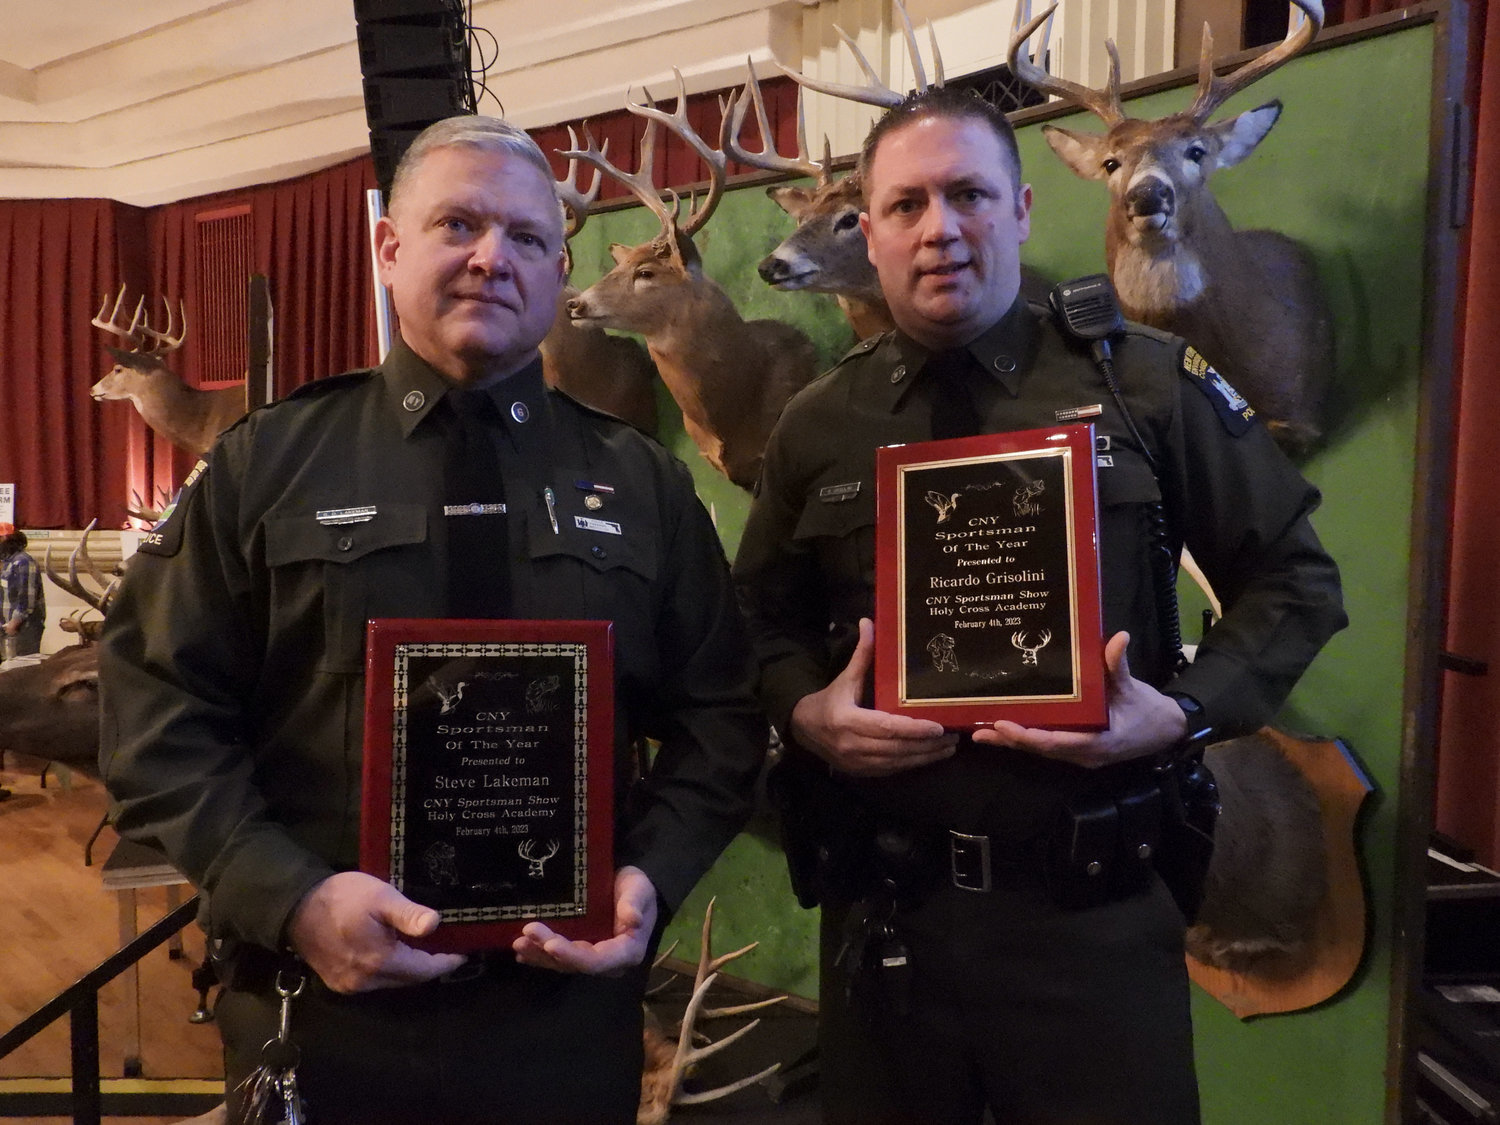 A first for the CNY Sportsman Show, two Sportsman of the Year were chosen: Steve Lakeman, left, and Ricardo Grisolini, both environmental conservation officers who have dedicated their lives to promoting the great outdoors and ensuring its for everyone.